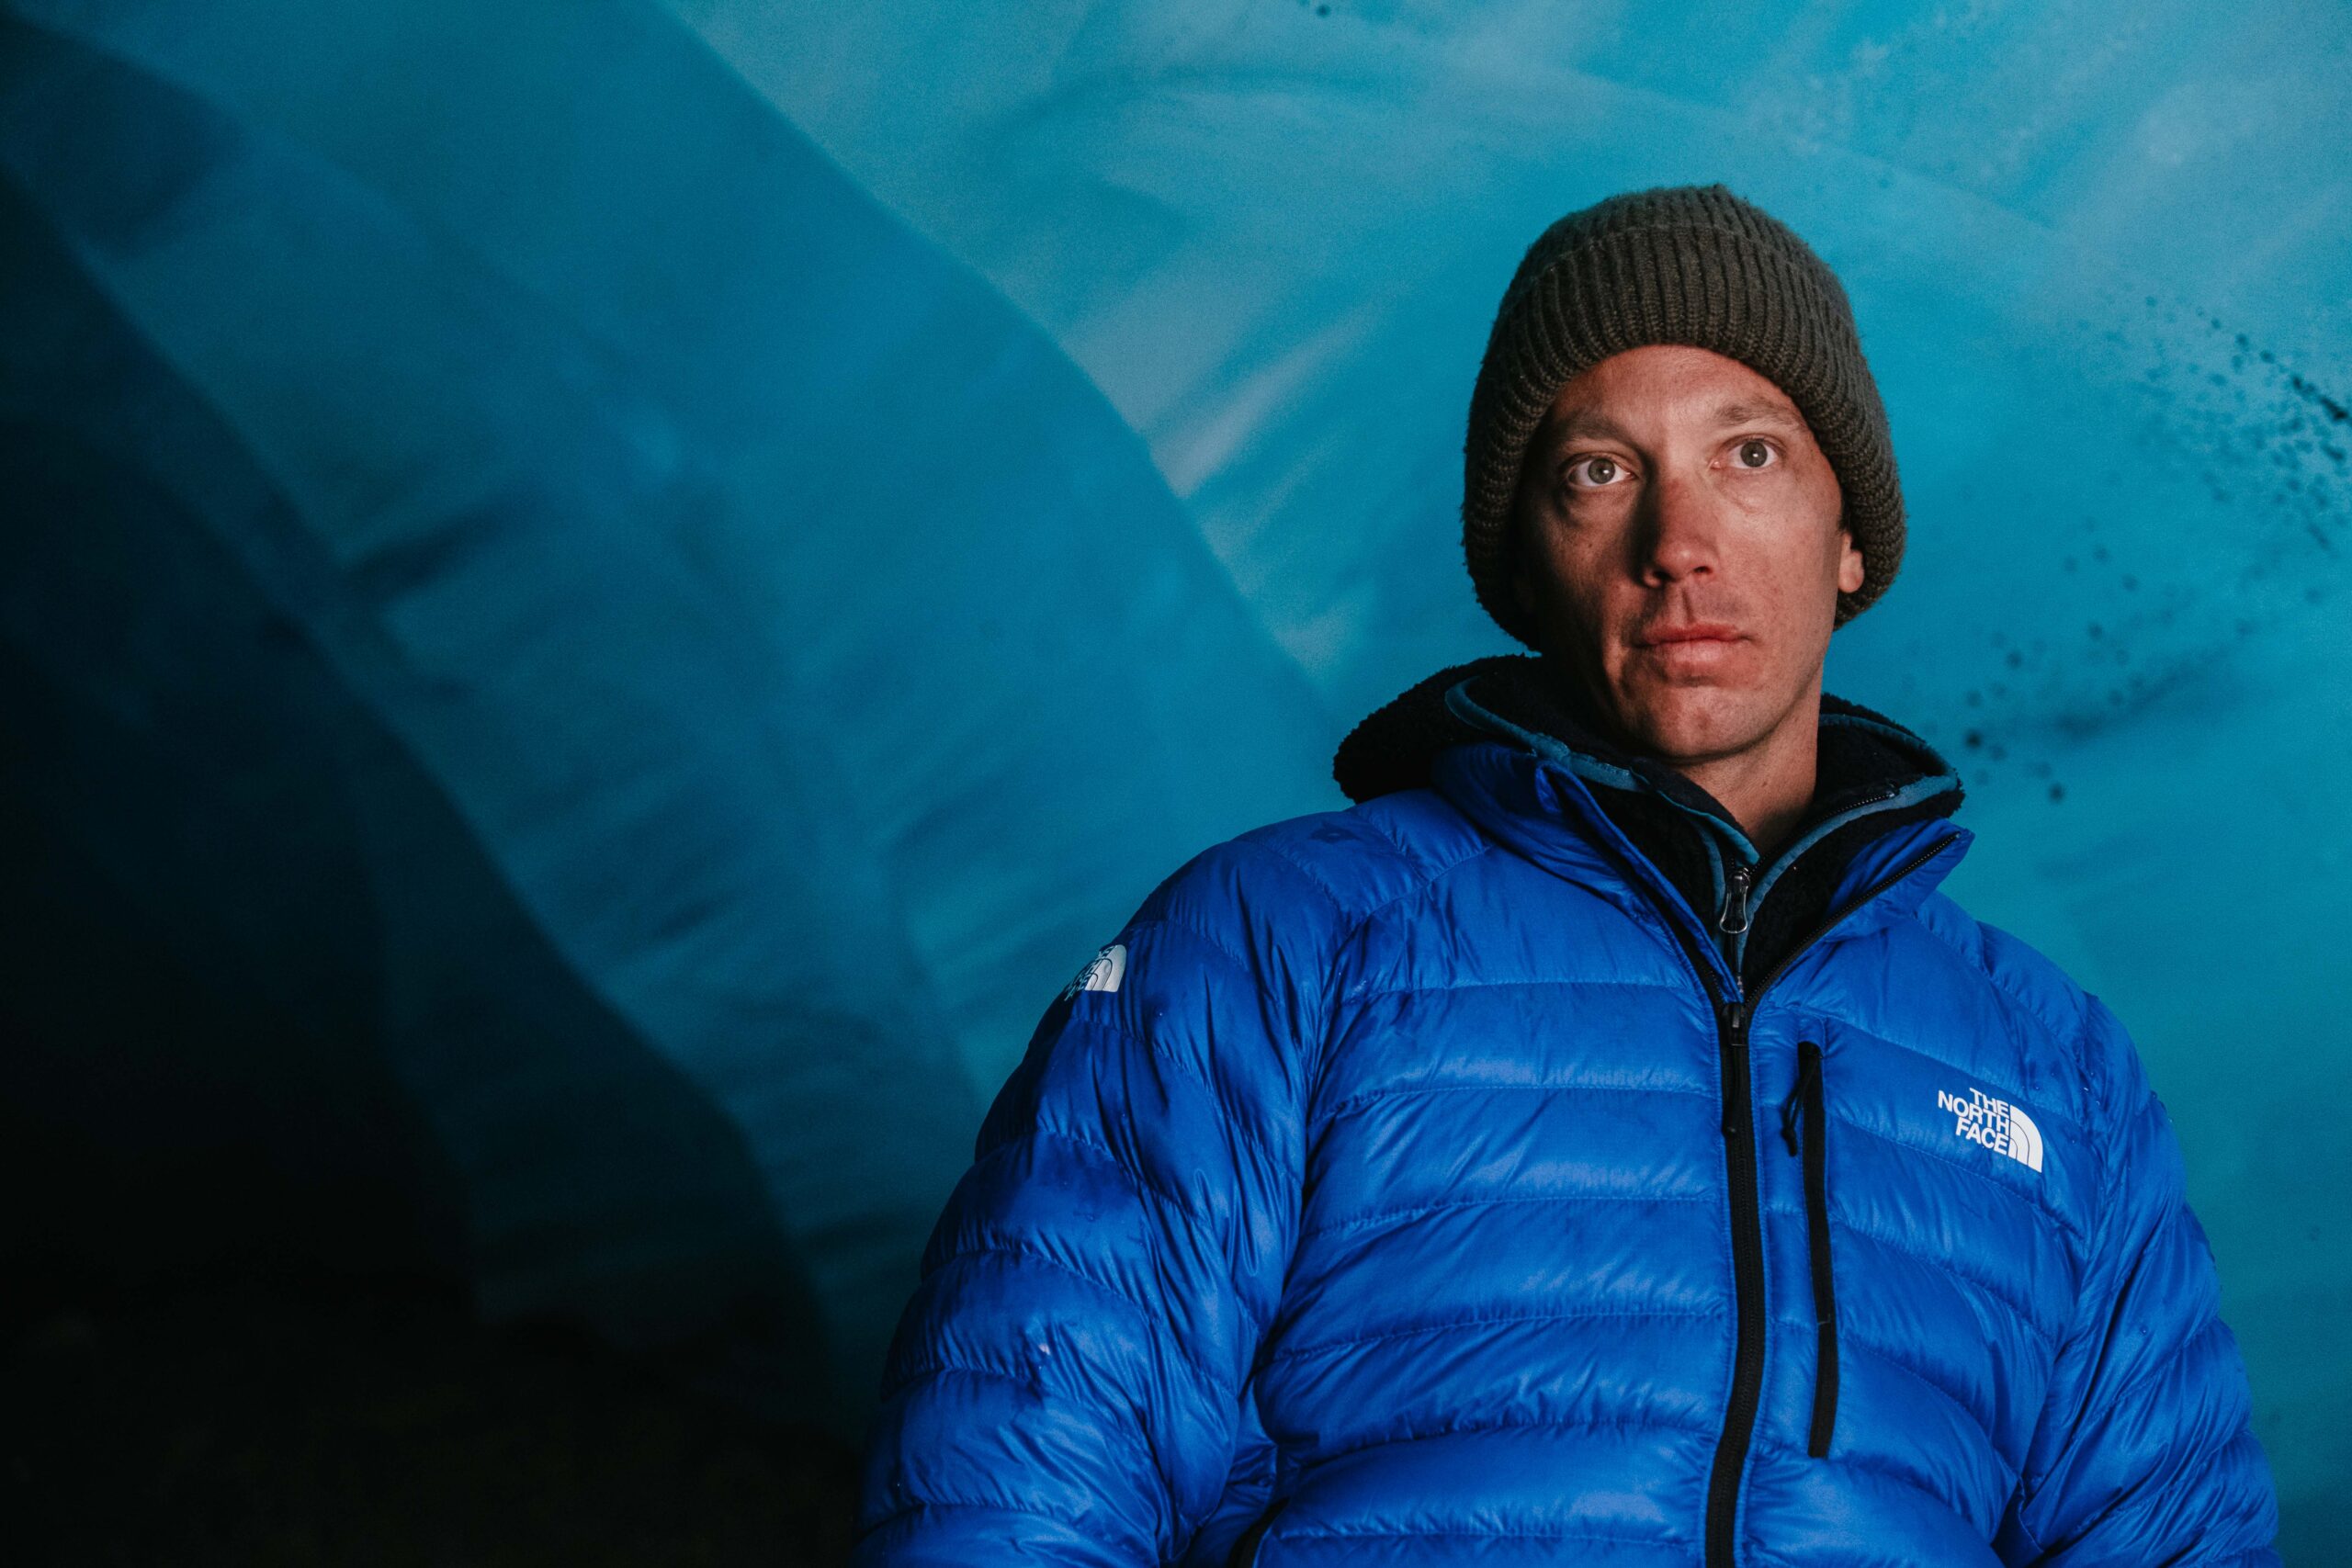 A profile image of the famous skier Sam Anthamatten in what looks like an ice cave, as he looks beyond the camera, unsmiling and serious